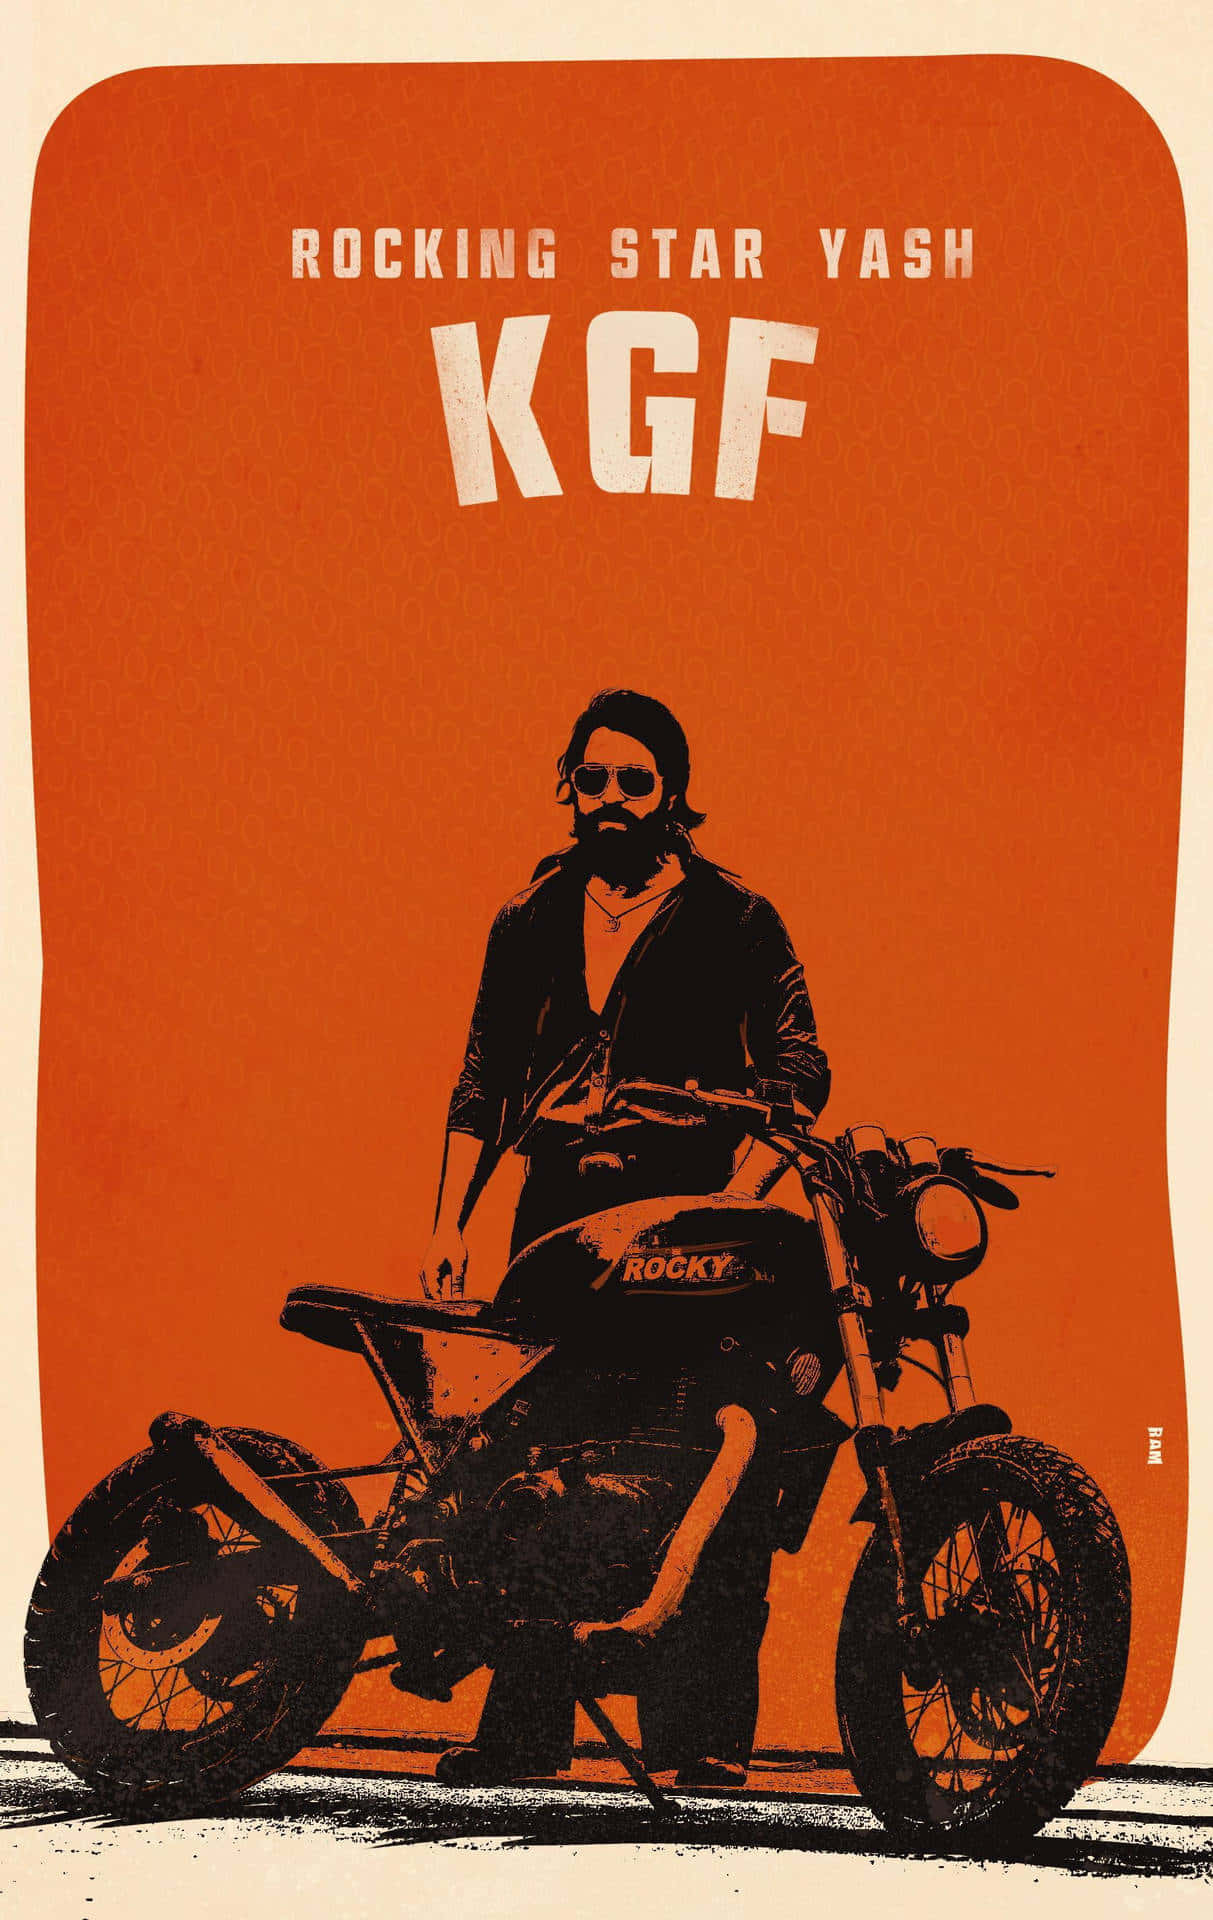 Download Kgf Background | Wallpapers.com